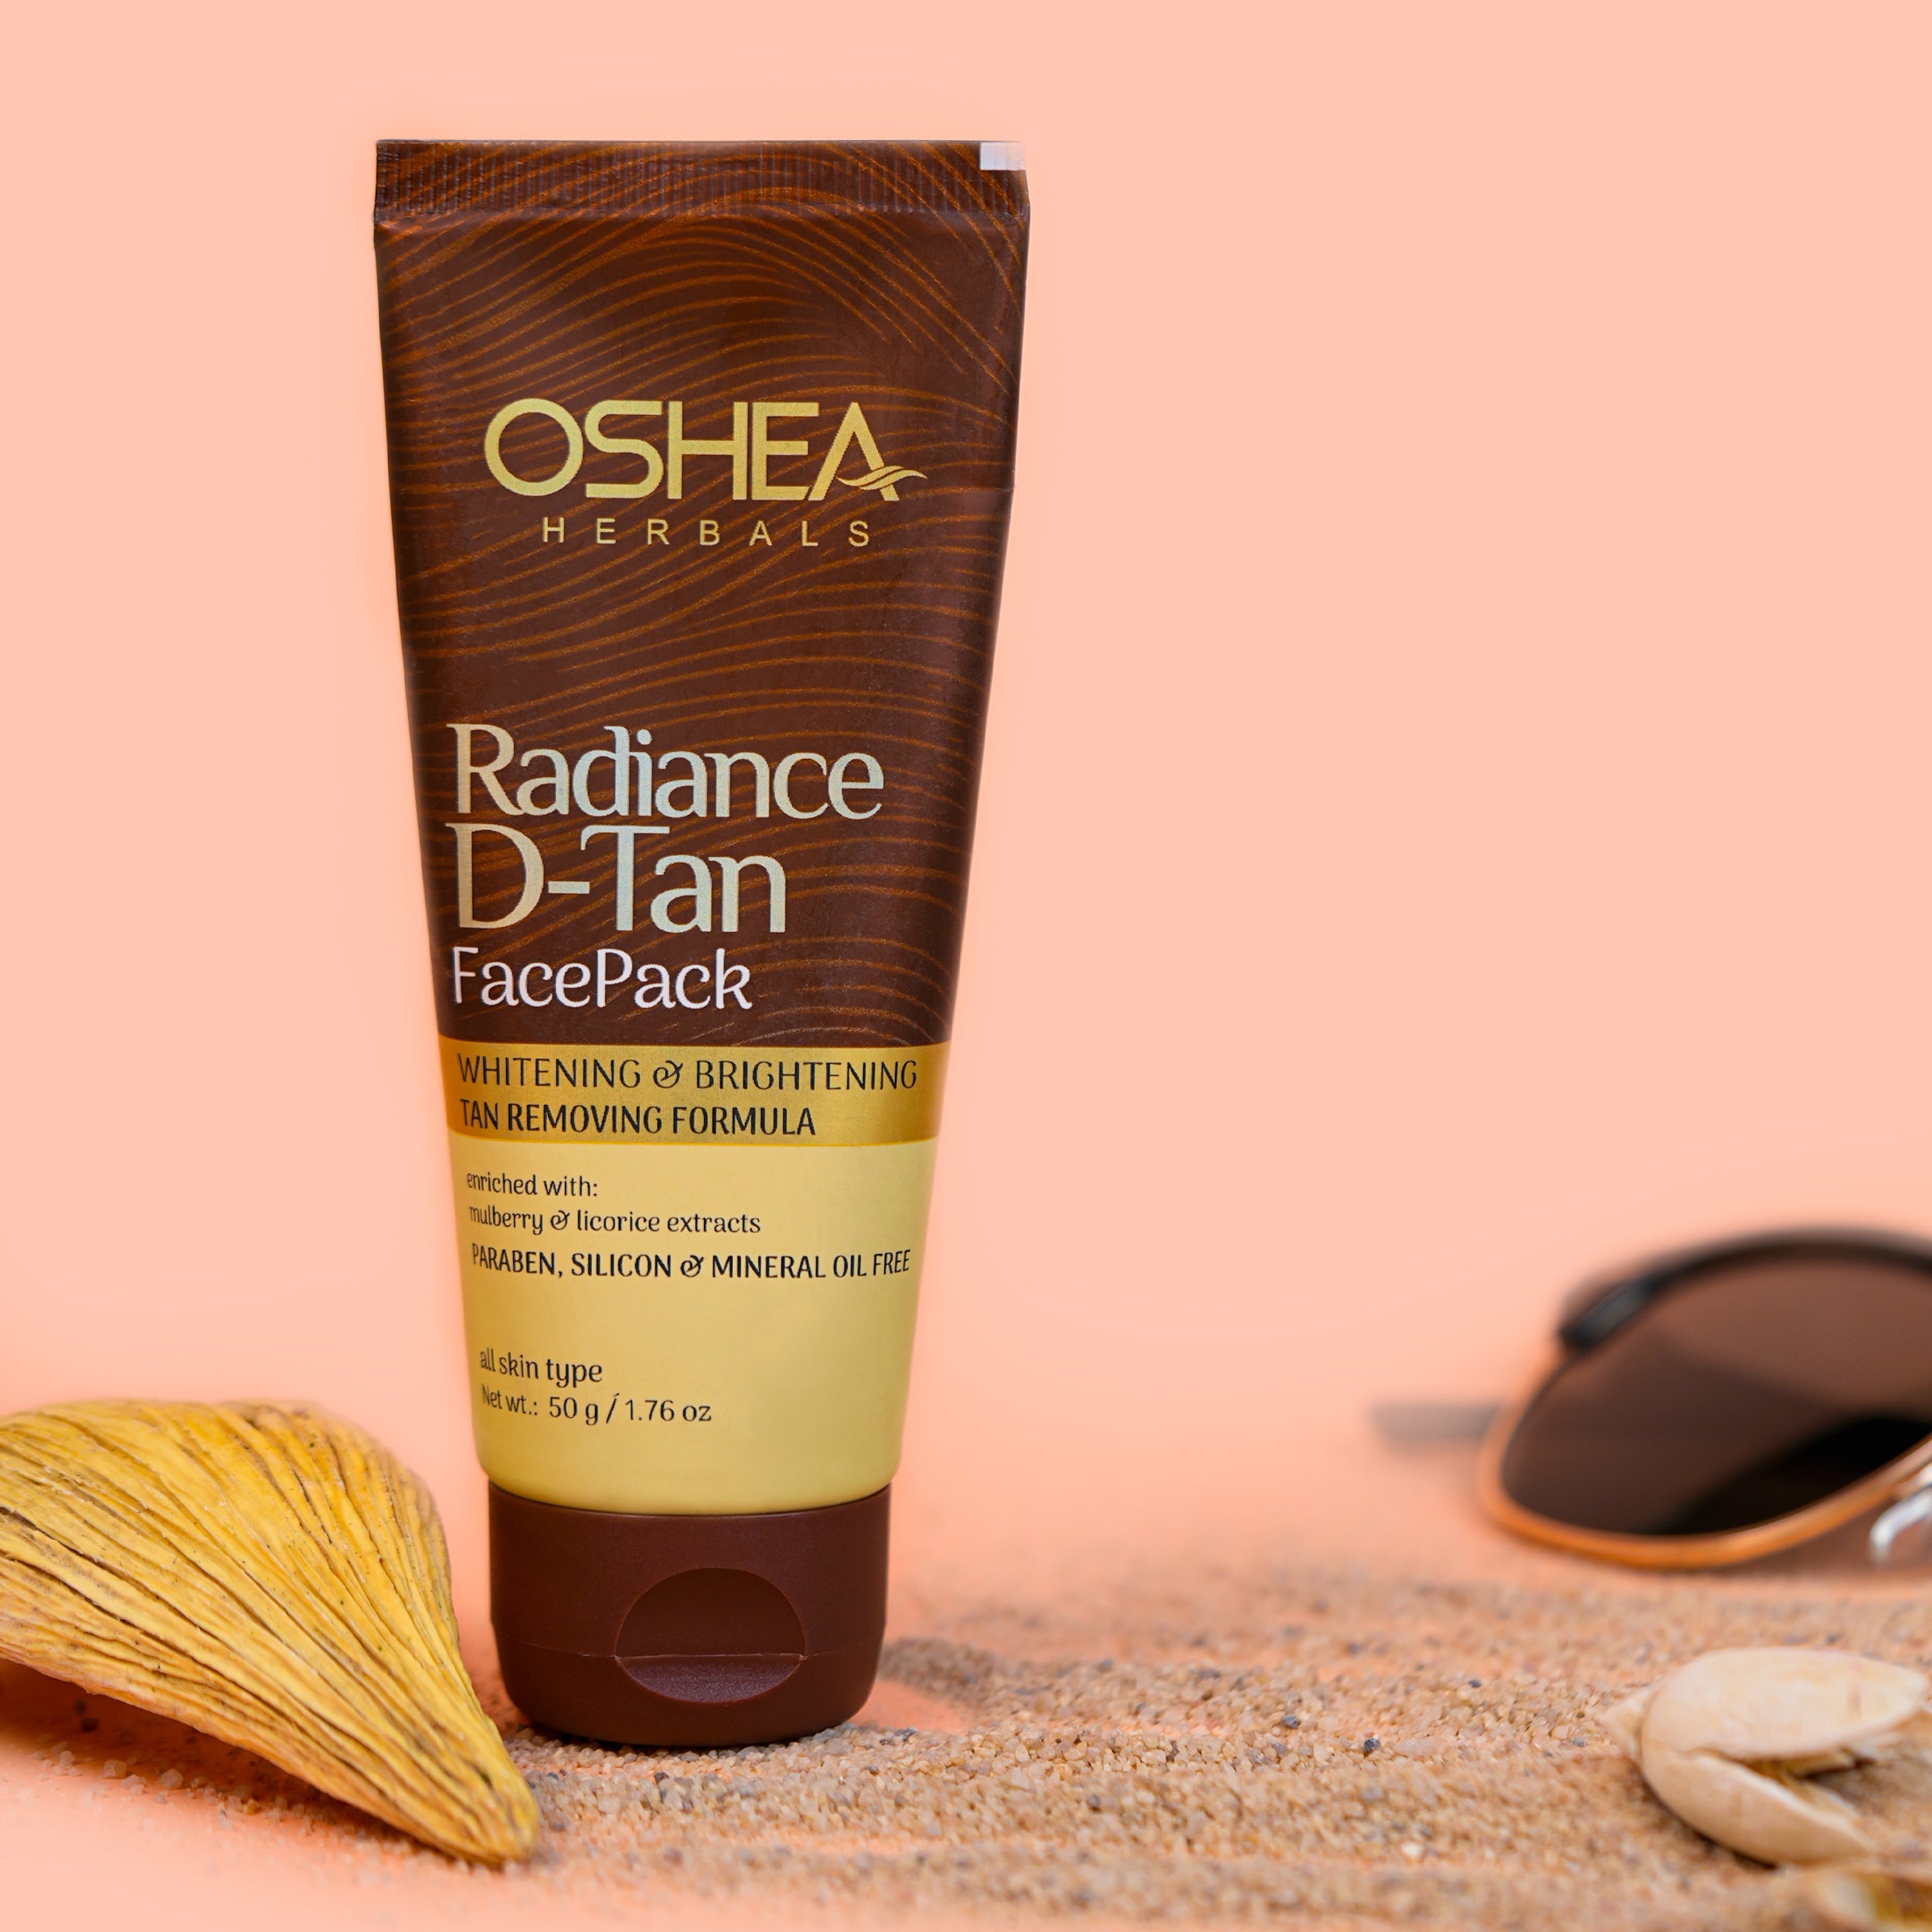 Radiance D-Tan Face Pack Oshea Herbals